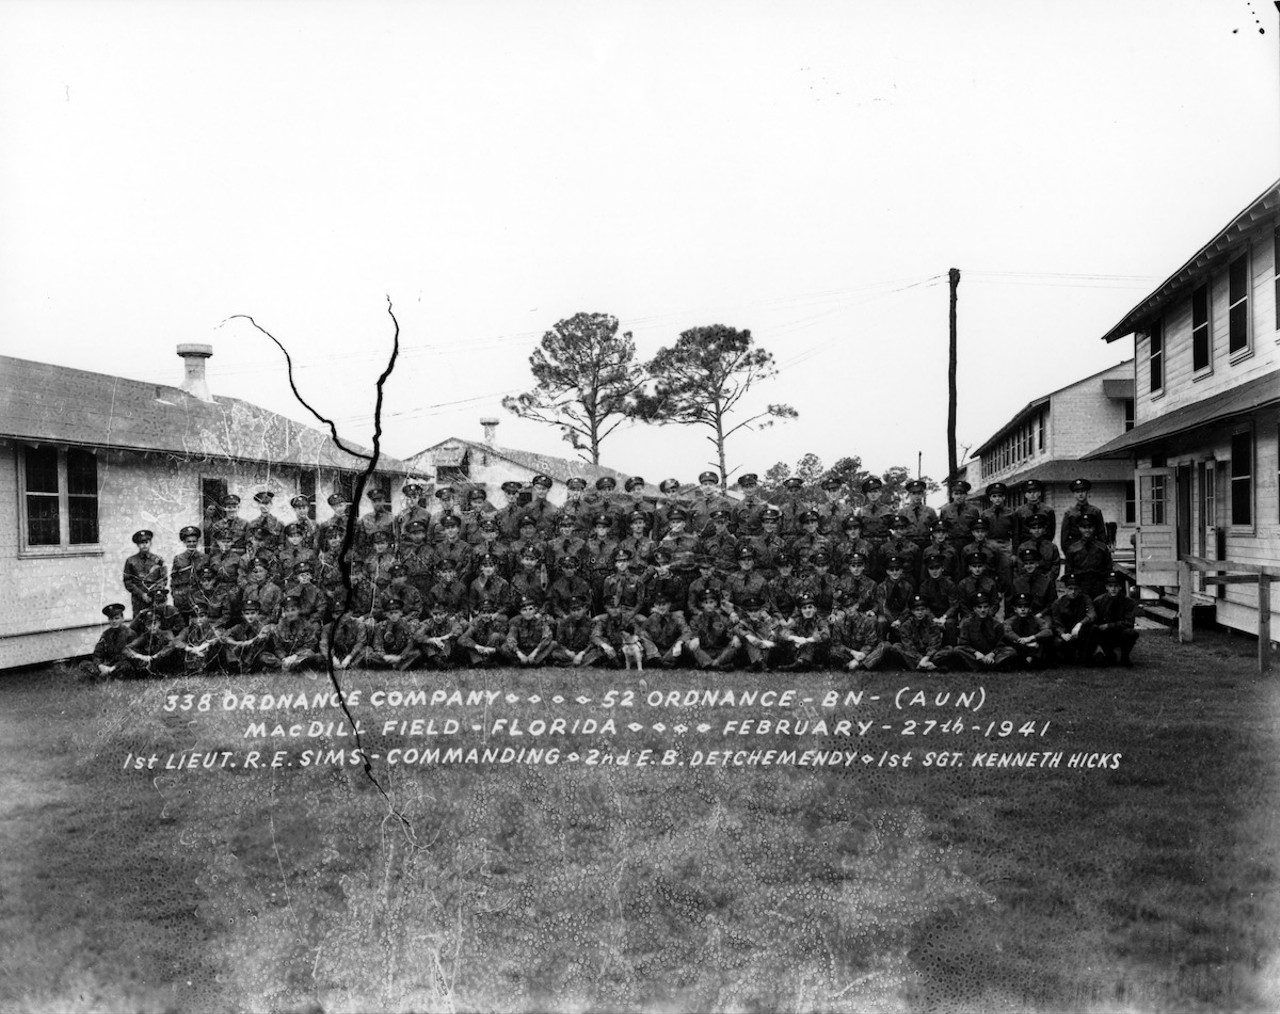 Christmas dinner, MacDill Field, 1941
Tampa was already home to important military installations when the Japanese attacked Pearl Harbor on December 7, 1941. The war led to construction of three air bases around the city: Drew Field, MacDill Air Force Base and Henderson Field, the remains of which lie beside the University of South Florida and the Yuengling Brewery (Mel’s Hot Dogs is its last remaining building).
The armed forces tried to make Christmas as pleasant as possible for recruits. The three airfields held a huge holiday feast for servicemen and their guests with white tablecloths and Christmas trees. The soldiers returned to the mess twice that day “on a basis of catch as catch can, no holds barred,” the Tribune observed. But the meal was marred by bad war news all over the world, and the holiday meals to follow would be less extravagant. Two years later, the commissaries cut the Christmas dinner luxuries found on the 1941 menu, such as ham, tomatoes, nuts, buttered peas, even pumpkin pie and lemonade. The ongoing war justified unprecedented military spending, especially in the southern U.S. Tampa has benefited from military spending ever since.Robertson and Fresh (Firm) and University of South Florida — Tampa Campus Library, "338 Ordnance Company - 52 Ordnance - BN - (AUN) - MacDill Field - Florida - February 27th 1941" (1941). Robertson and Fresh Collection of Tampa Photographs. Image 145.